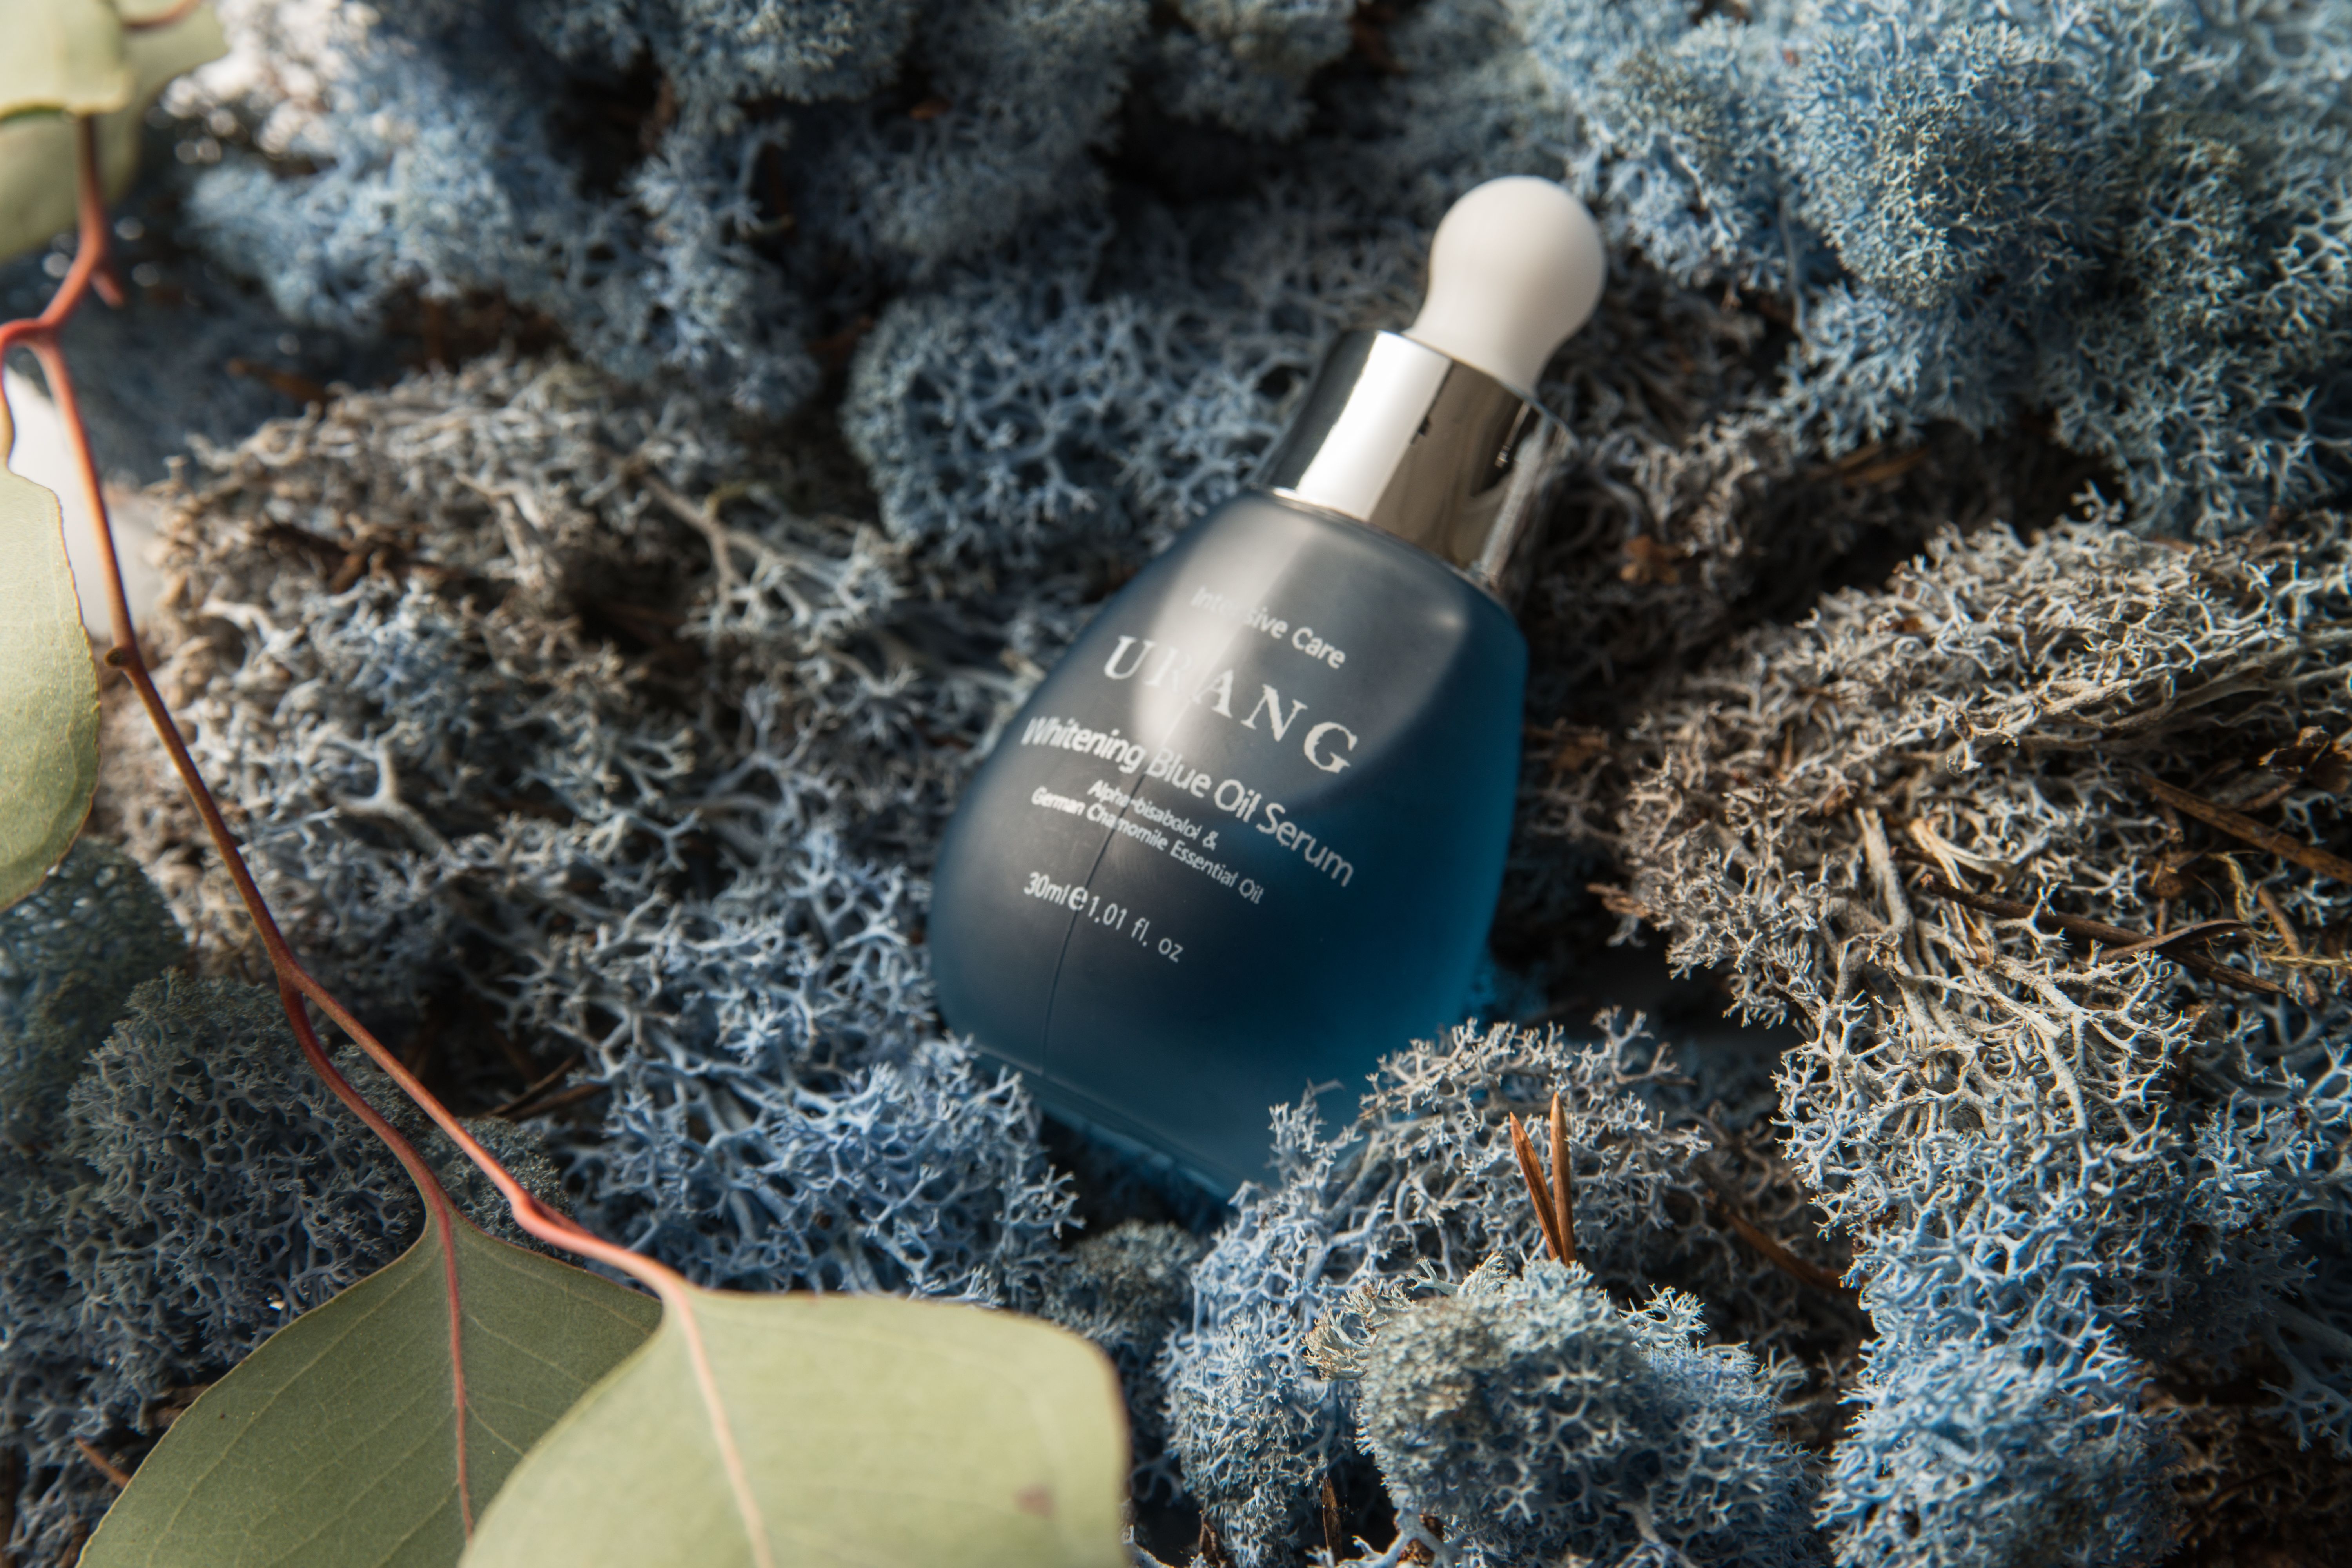 Key active ingredients of blue oil serum and its efficacy on skin